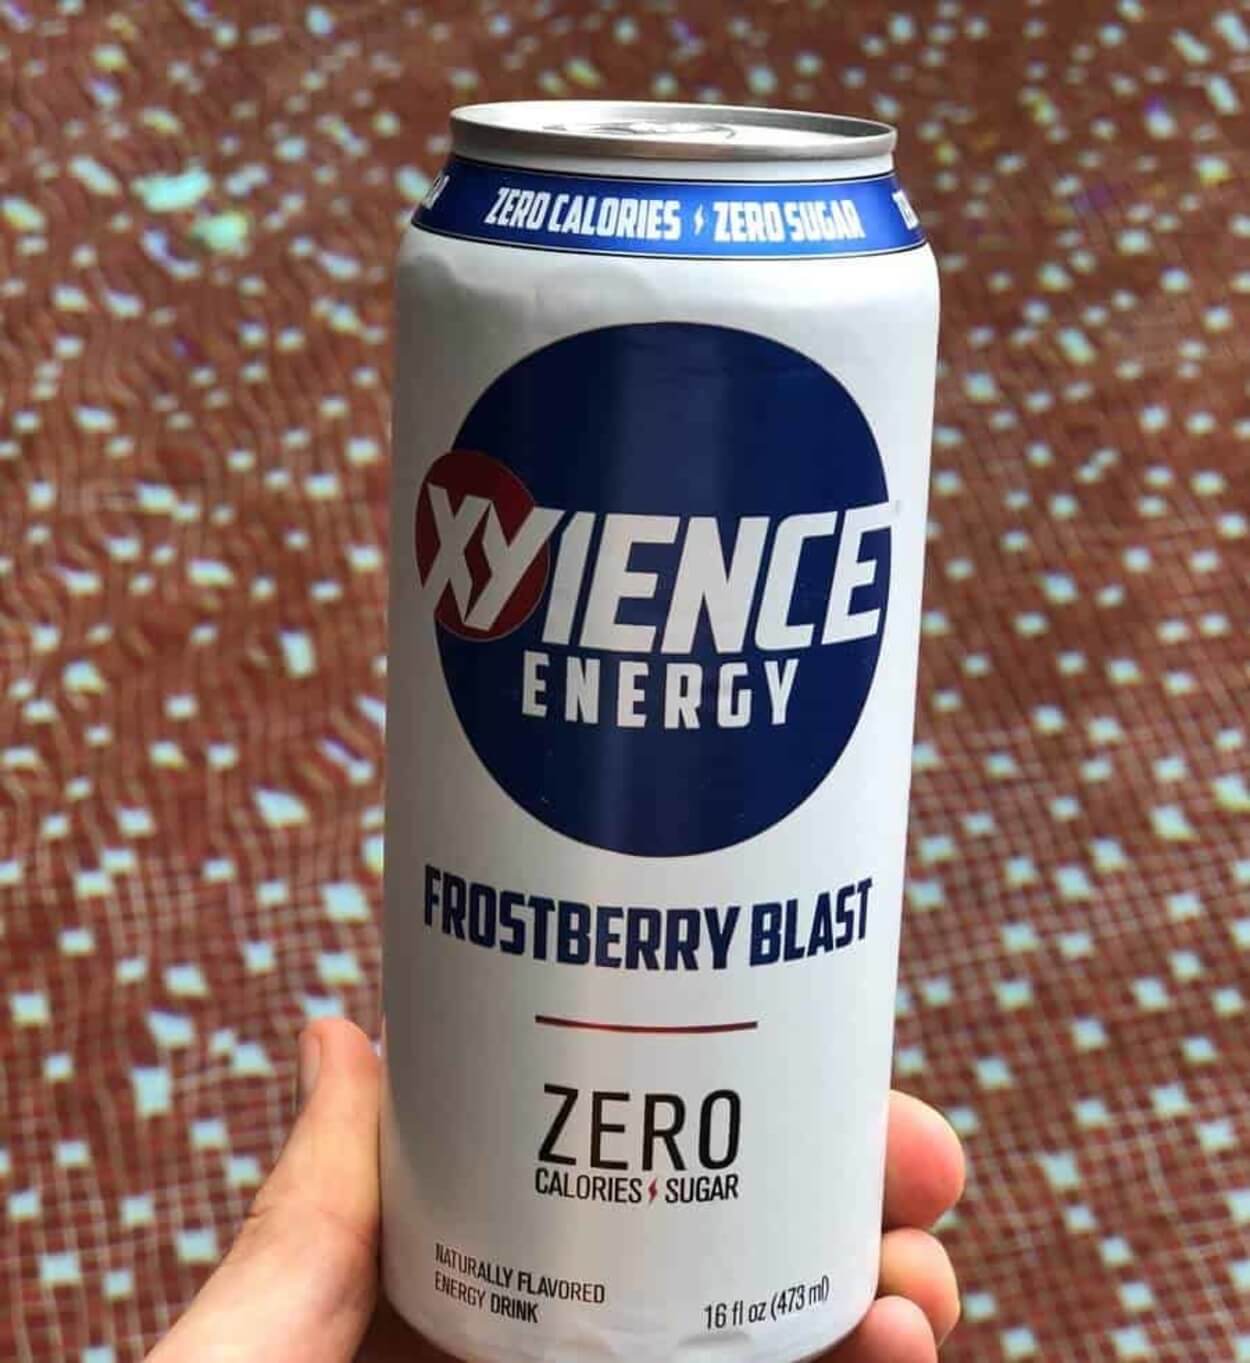 A can of Xyience energy drink.